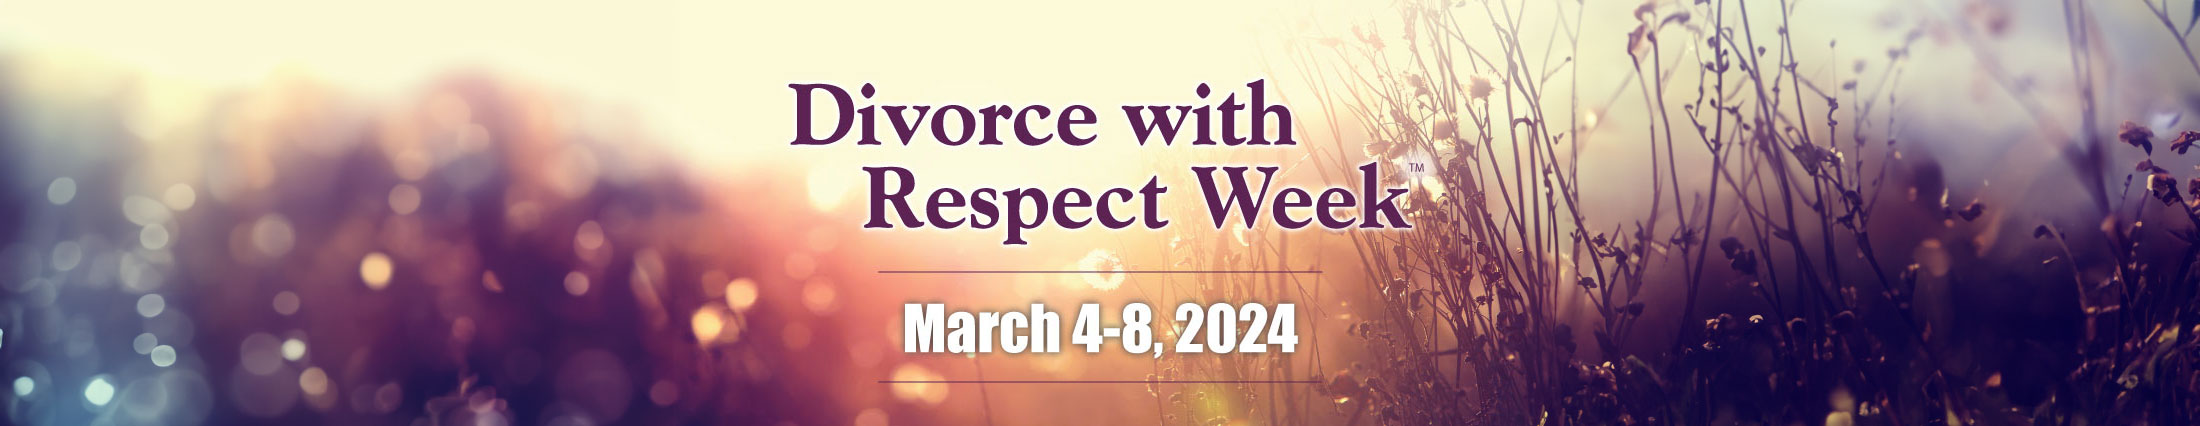 divorce-with-respect-banner-2024-larger